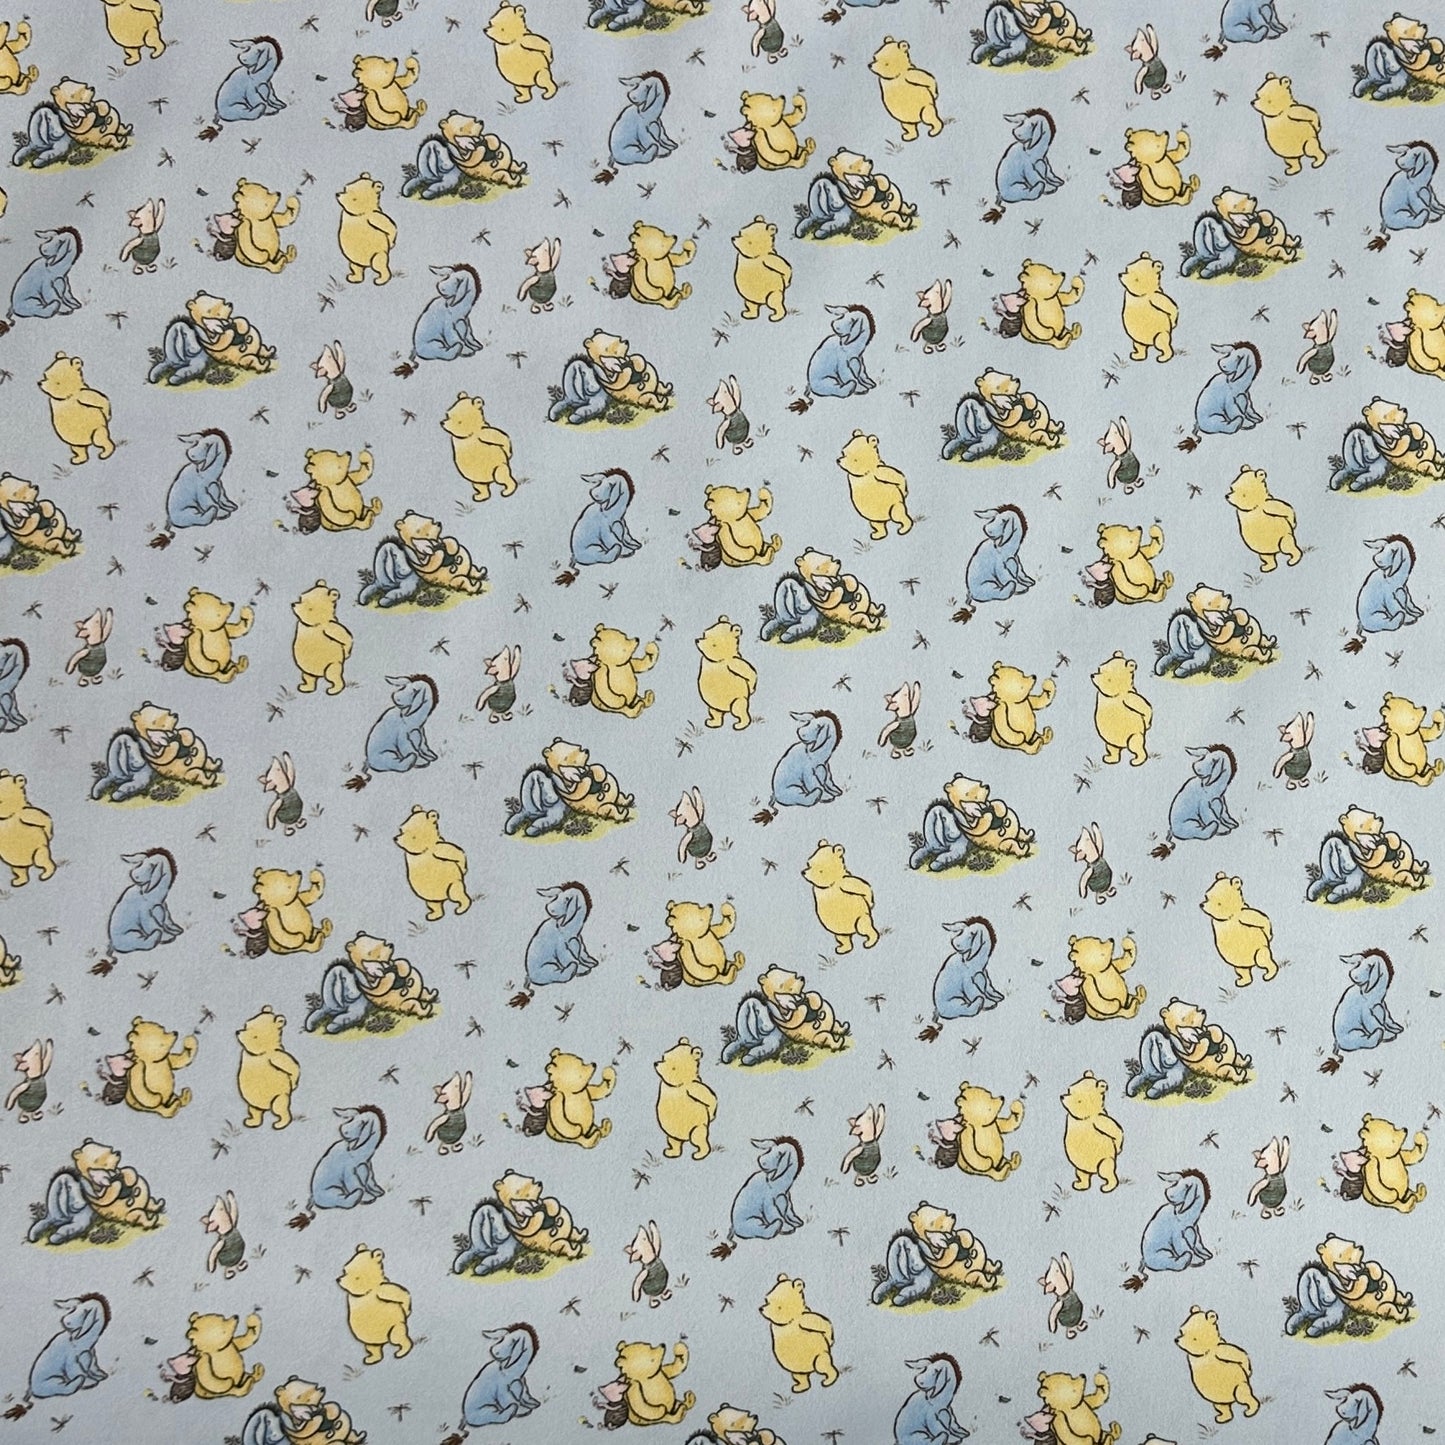 Winnie the Pooh and Friends on Blue 1 mil PUL Fabric - Made in the USA